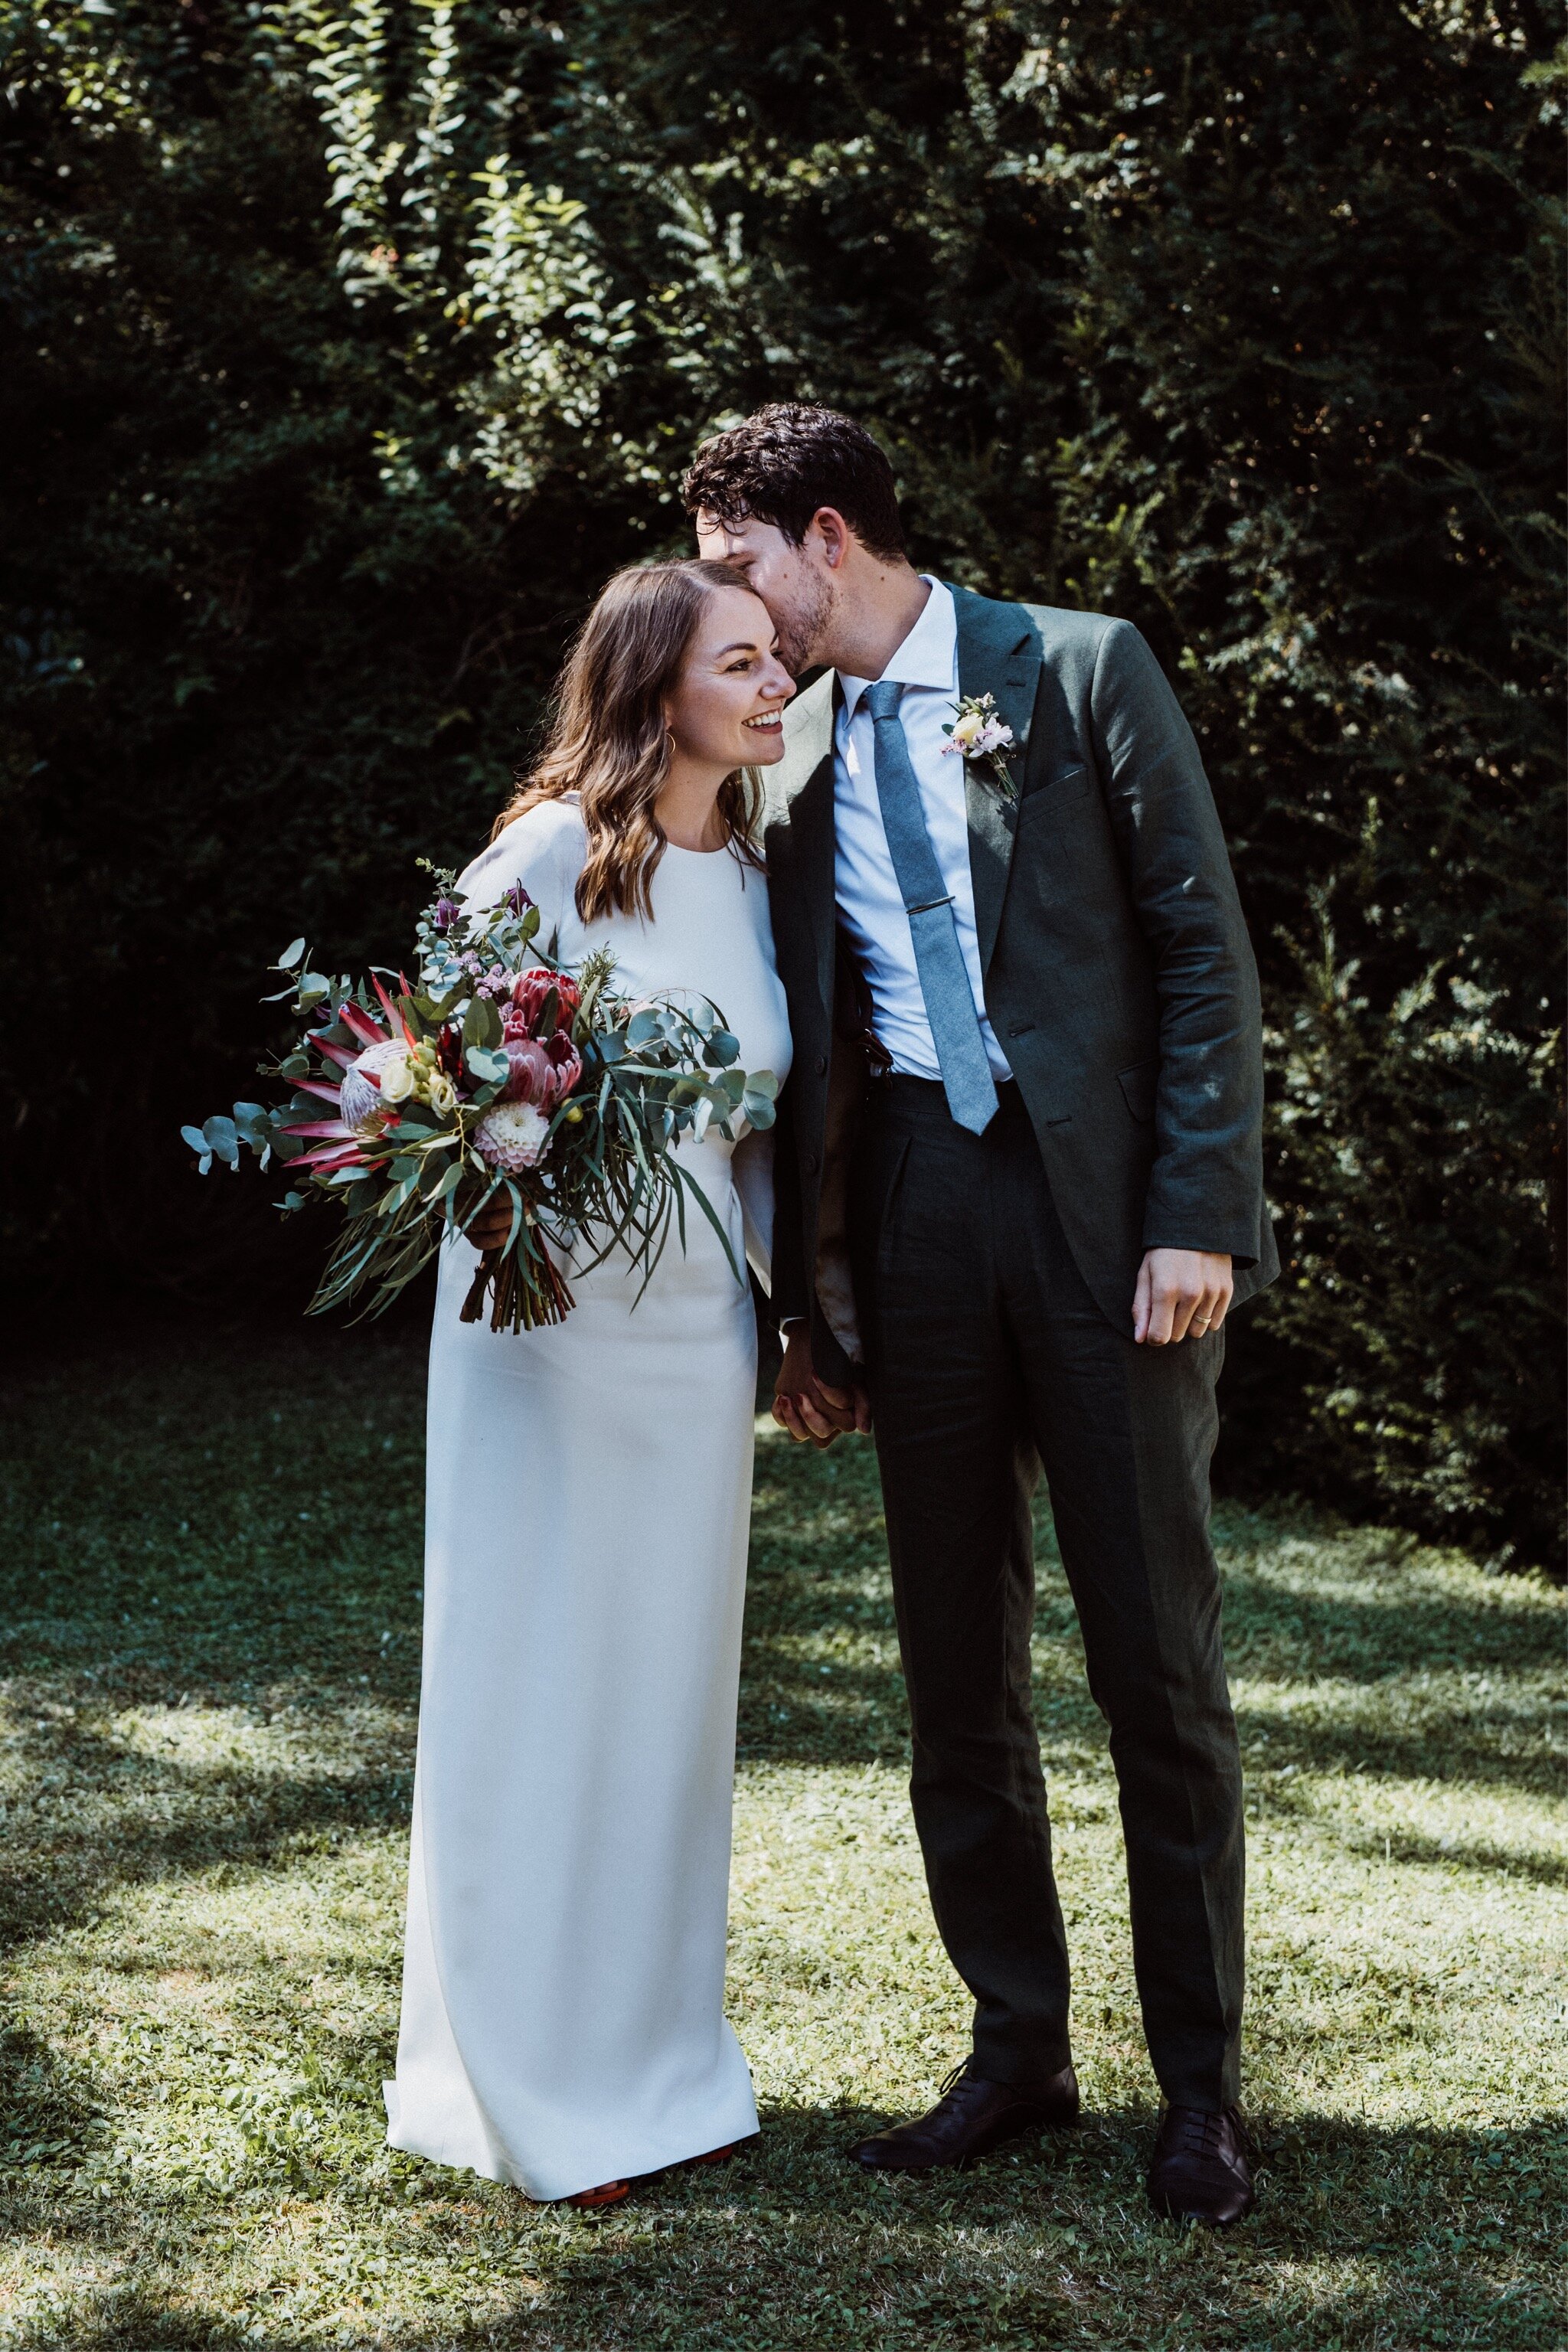 23_Katie + Iain Blog-44_bride_chateau_wang_photography_ceremony_humanist_bouquet_protea_french_destination_alexander_outdoor_wedding.jpg